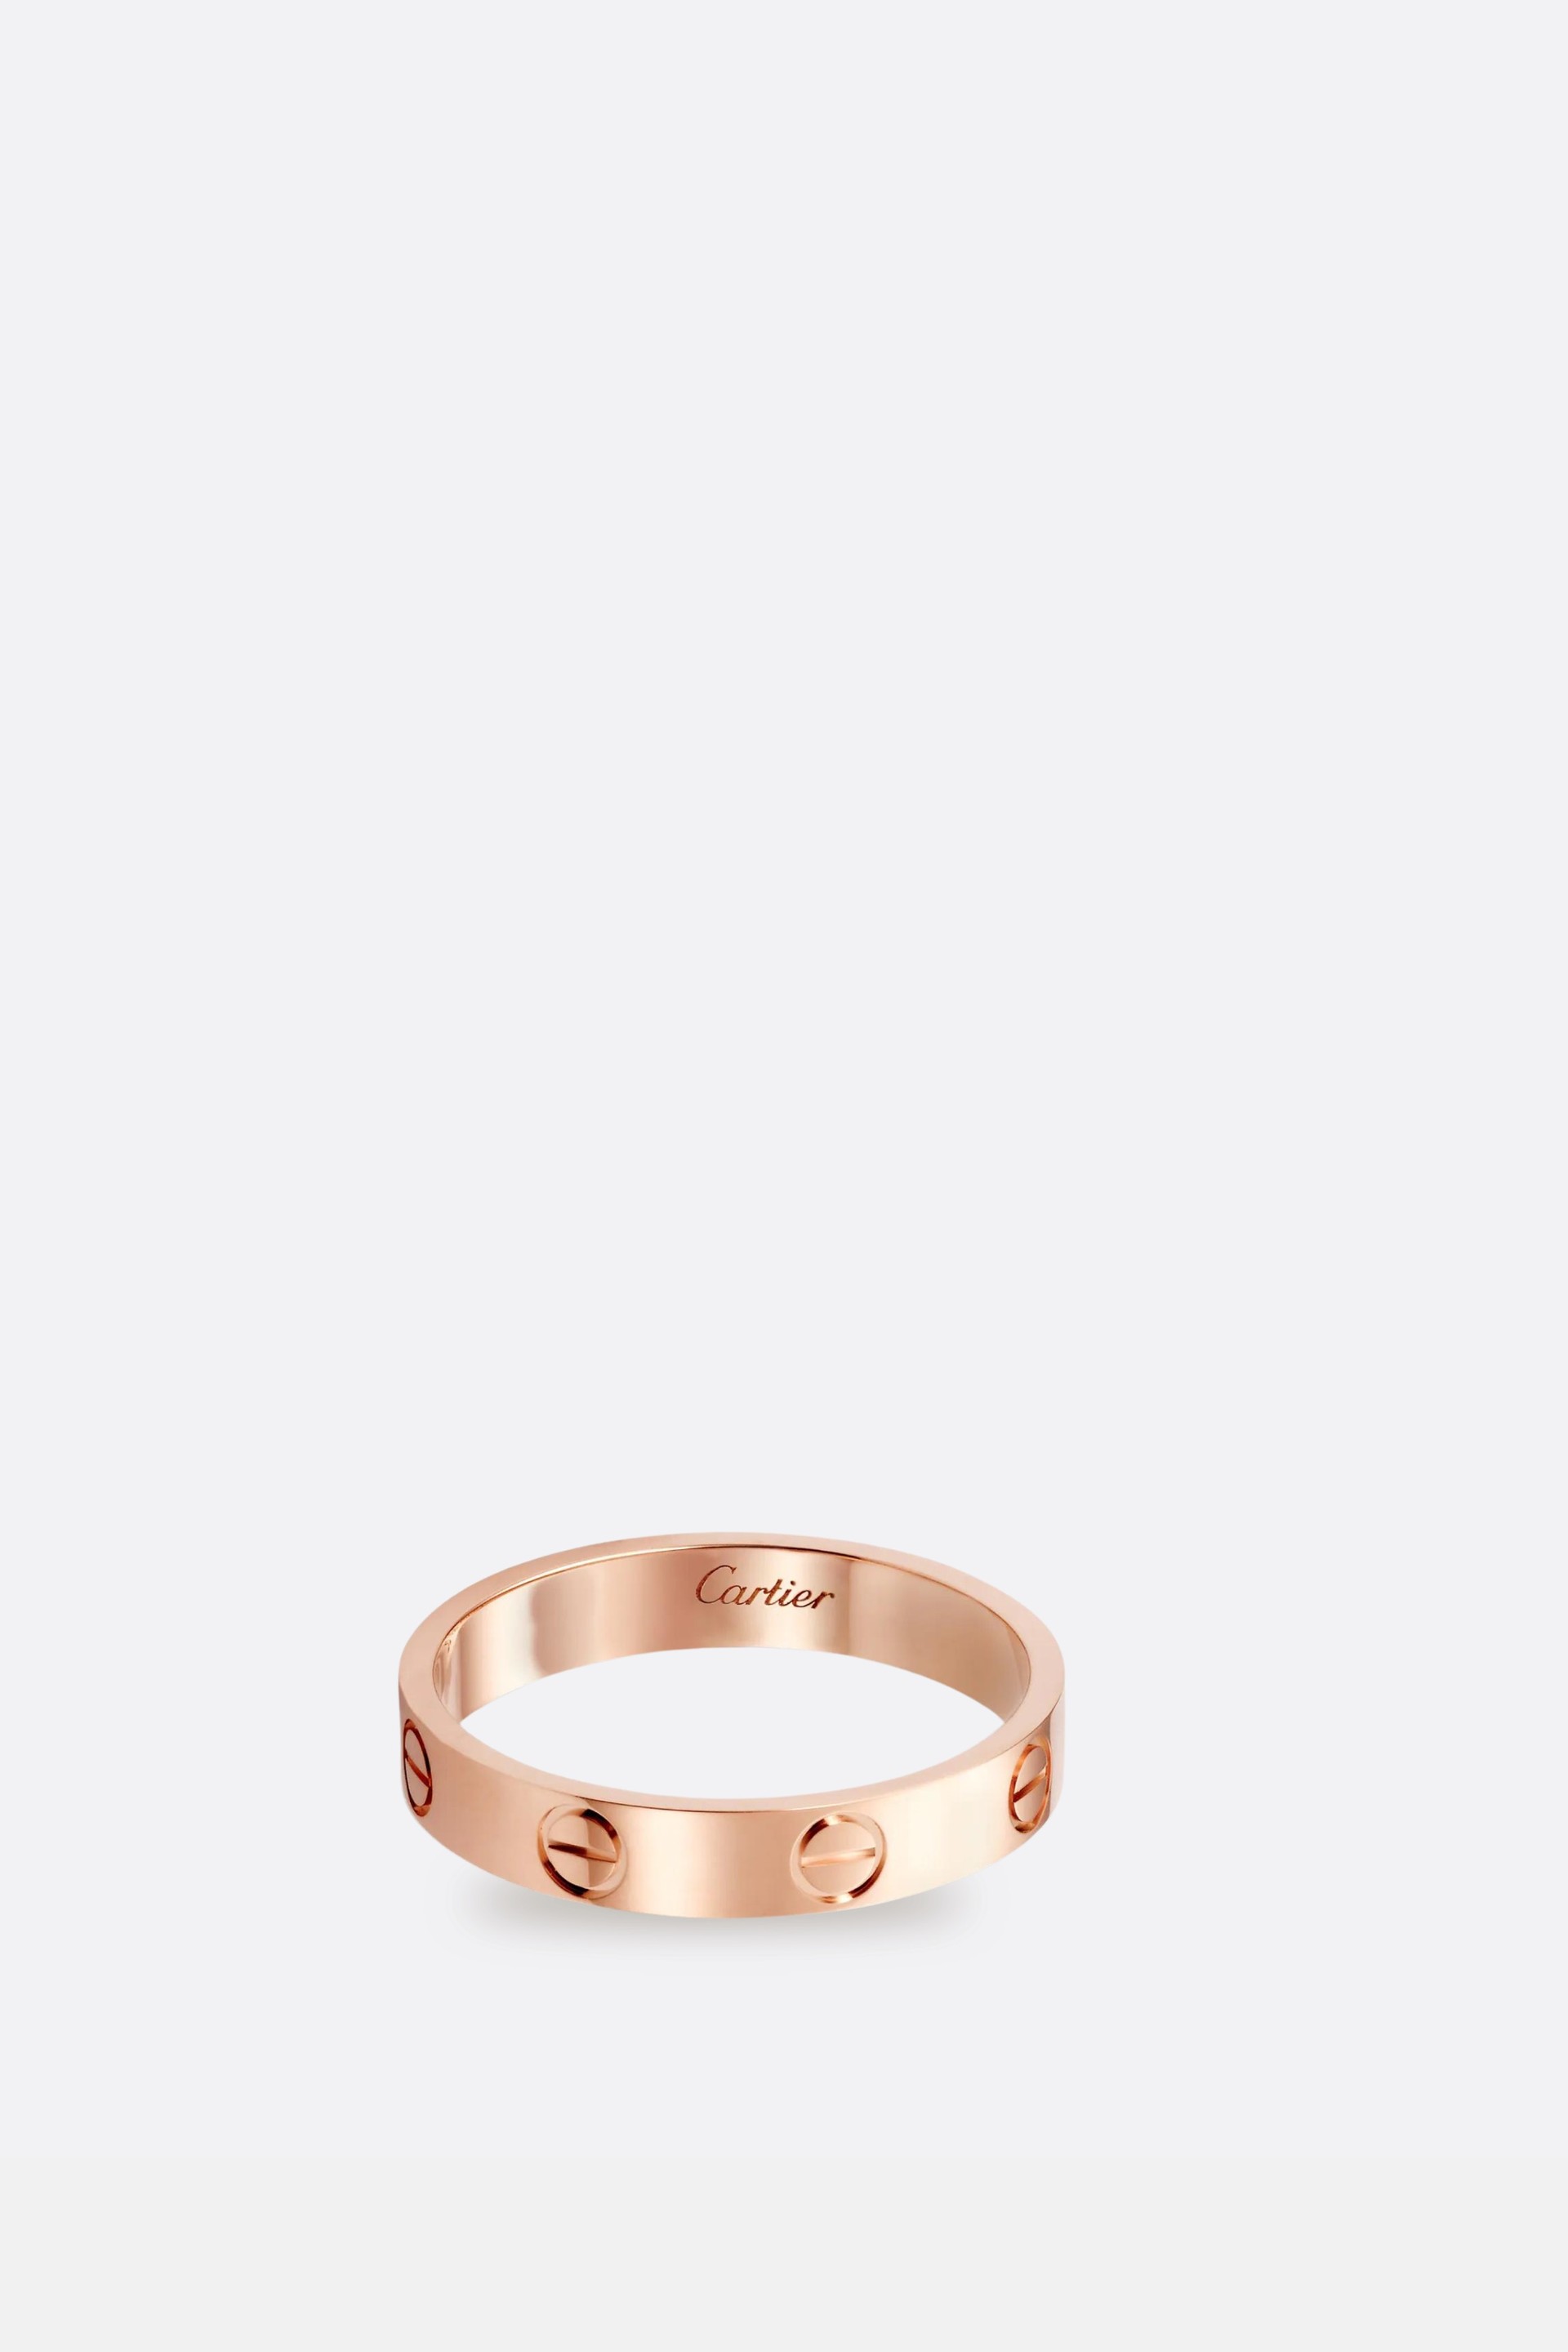 Cartier - Love Wedding Band, Ring - Rose Gold